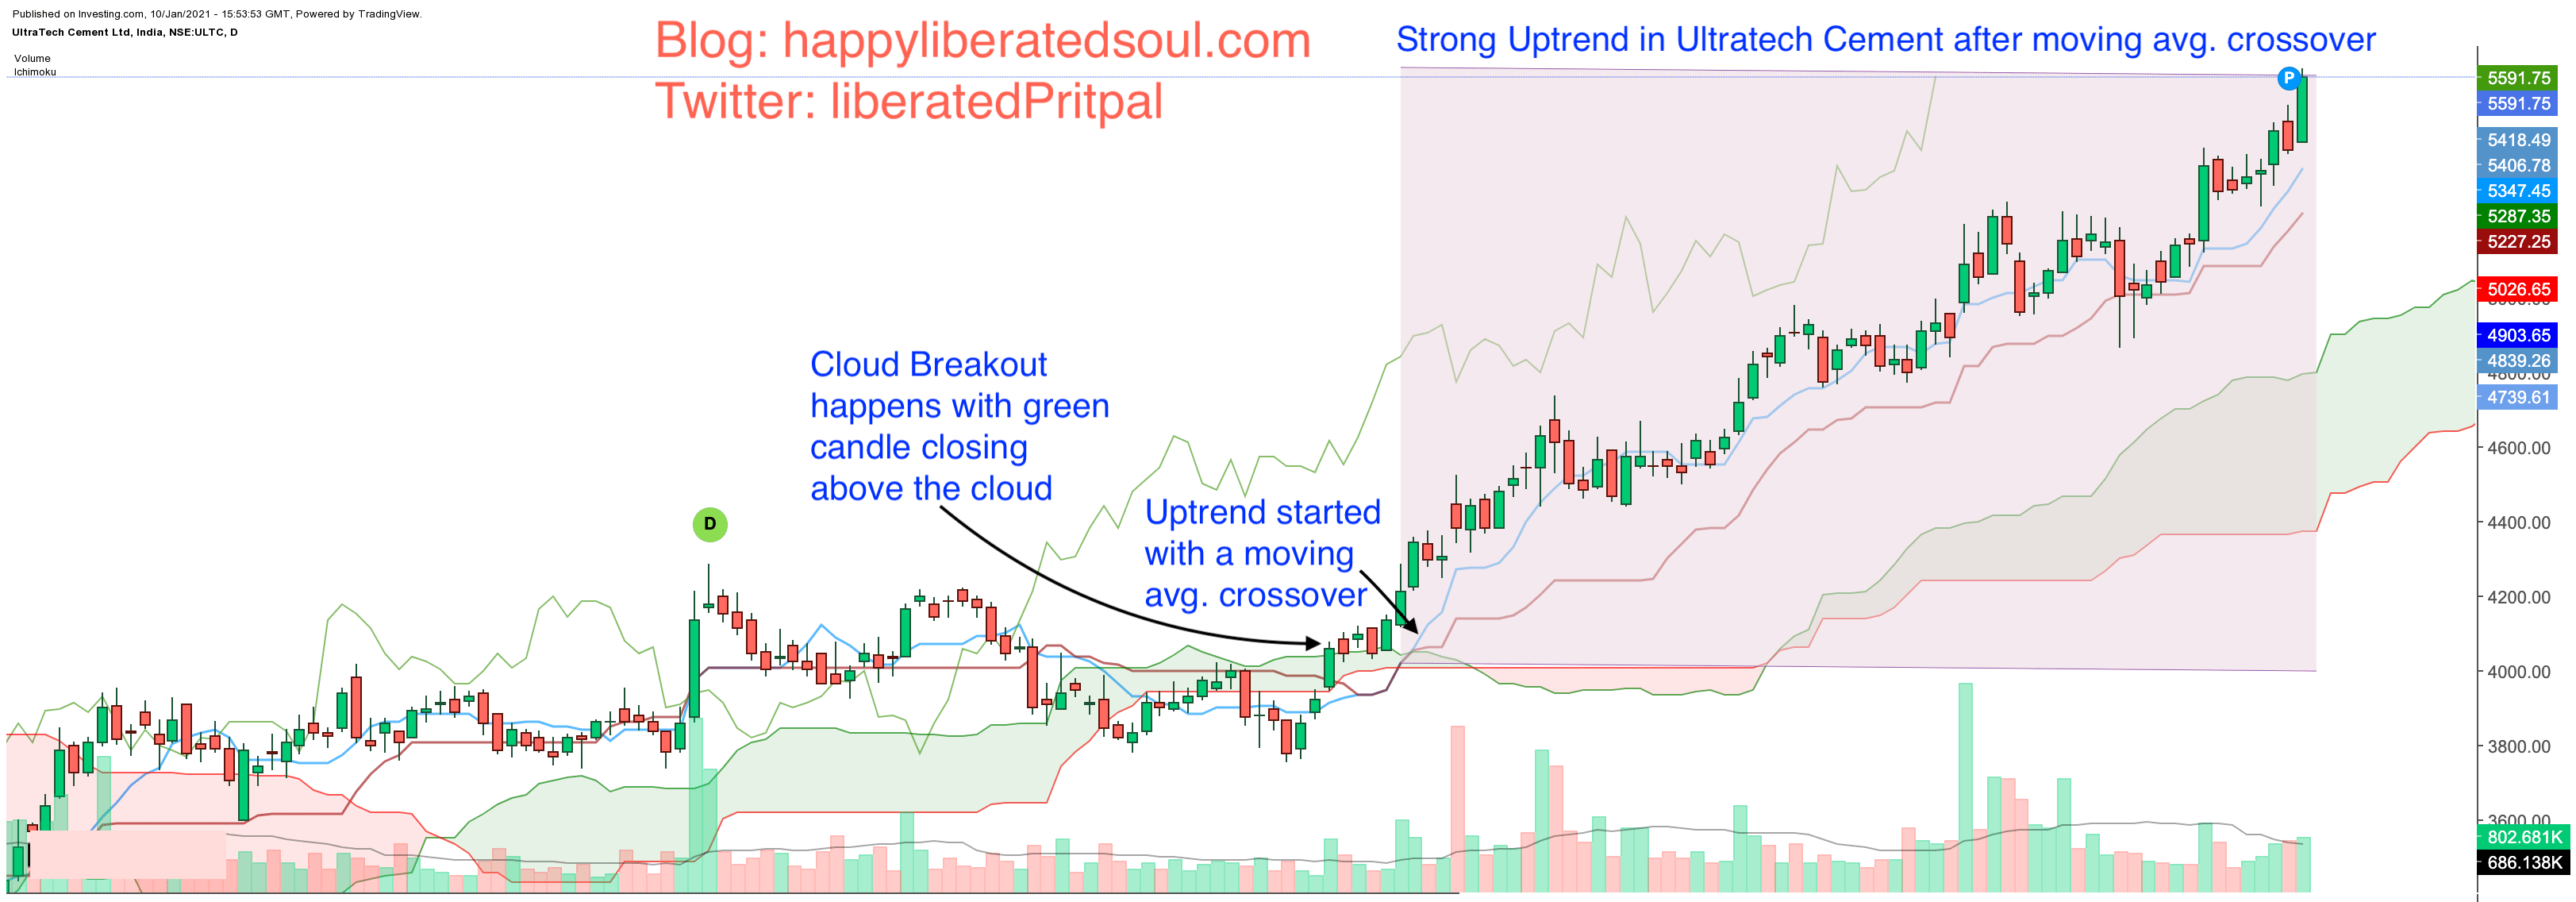 Moving Averages Crossover with Ichimoku Clouds trading strategy on Ultratech Cement chart on daily timeframe: Happy liberated soul